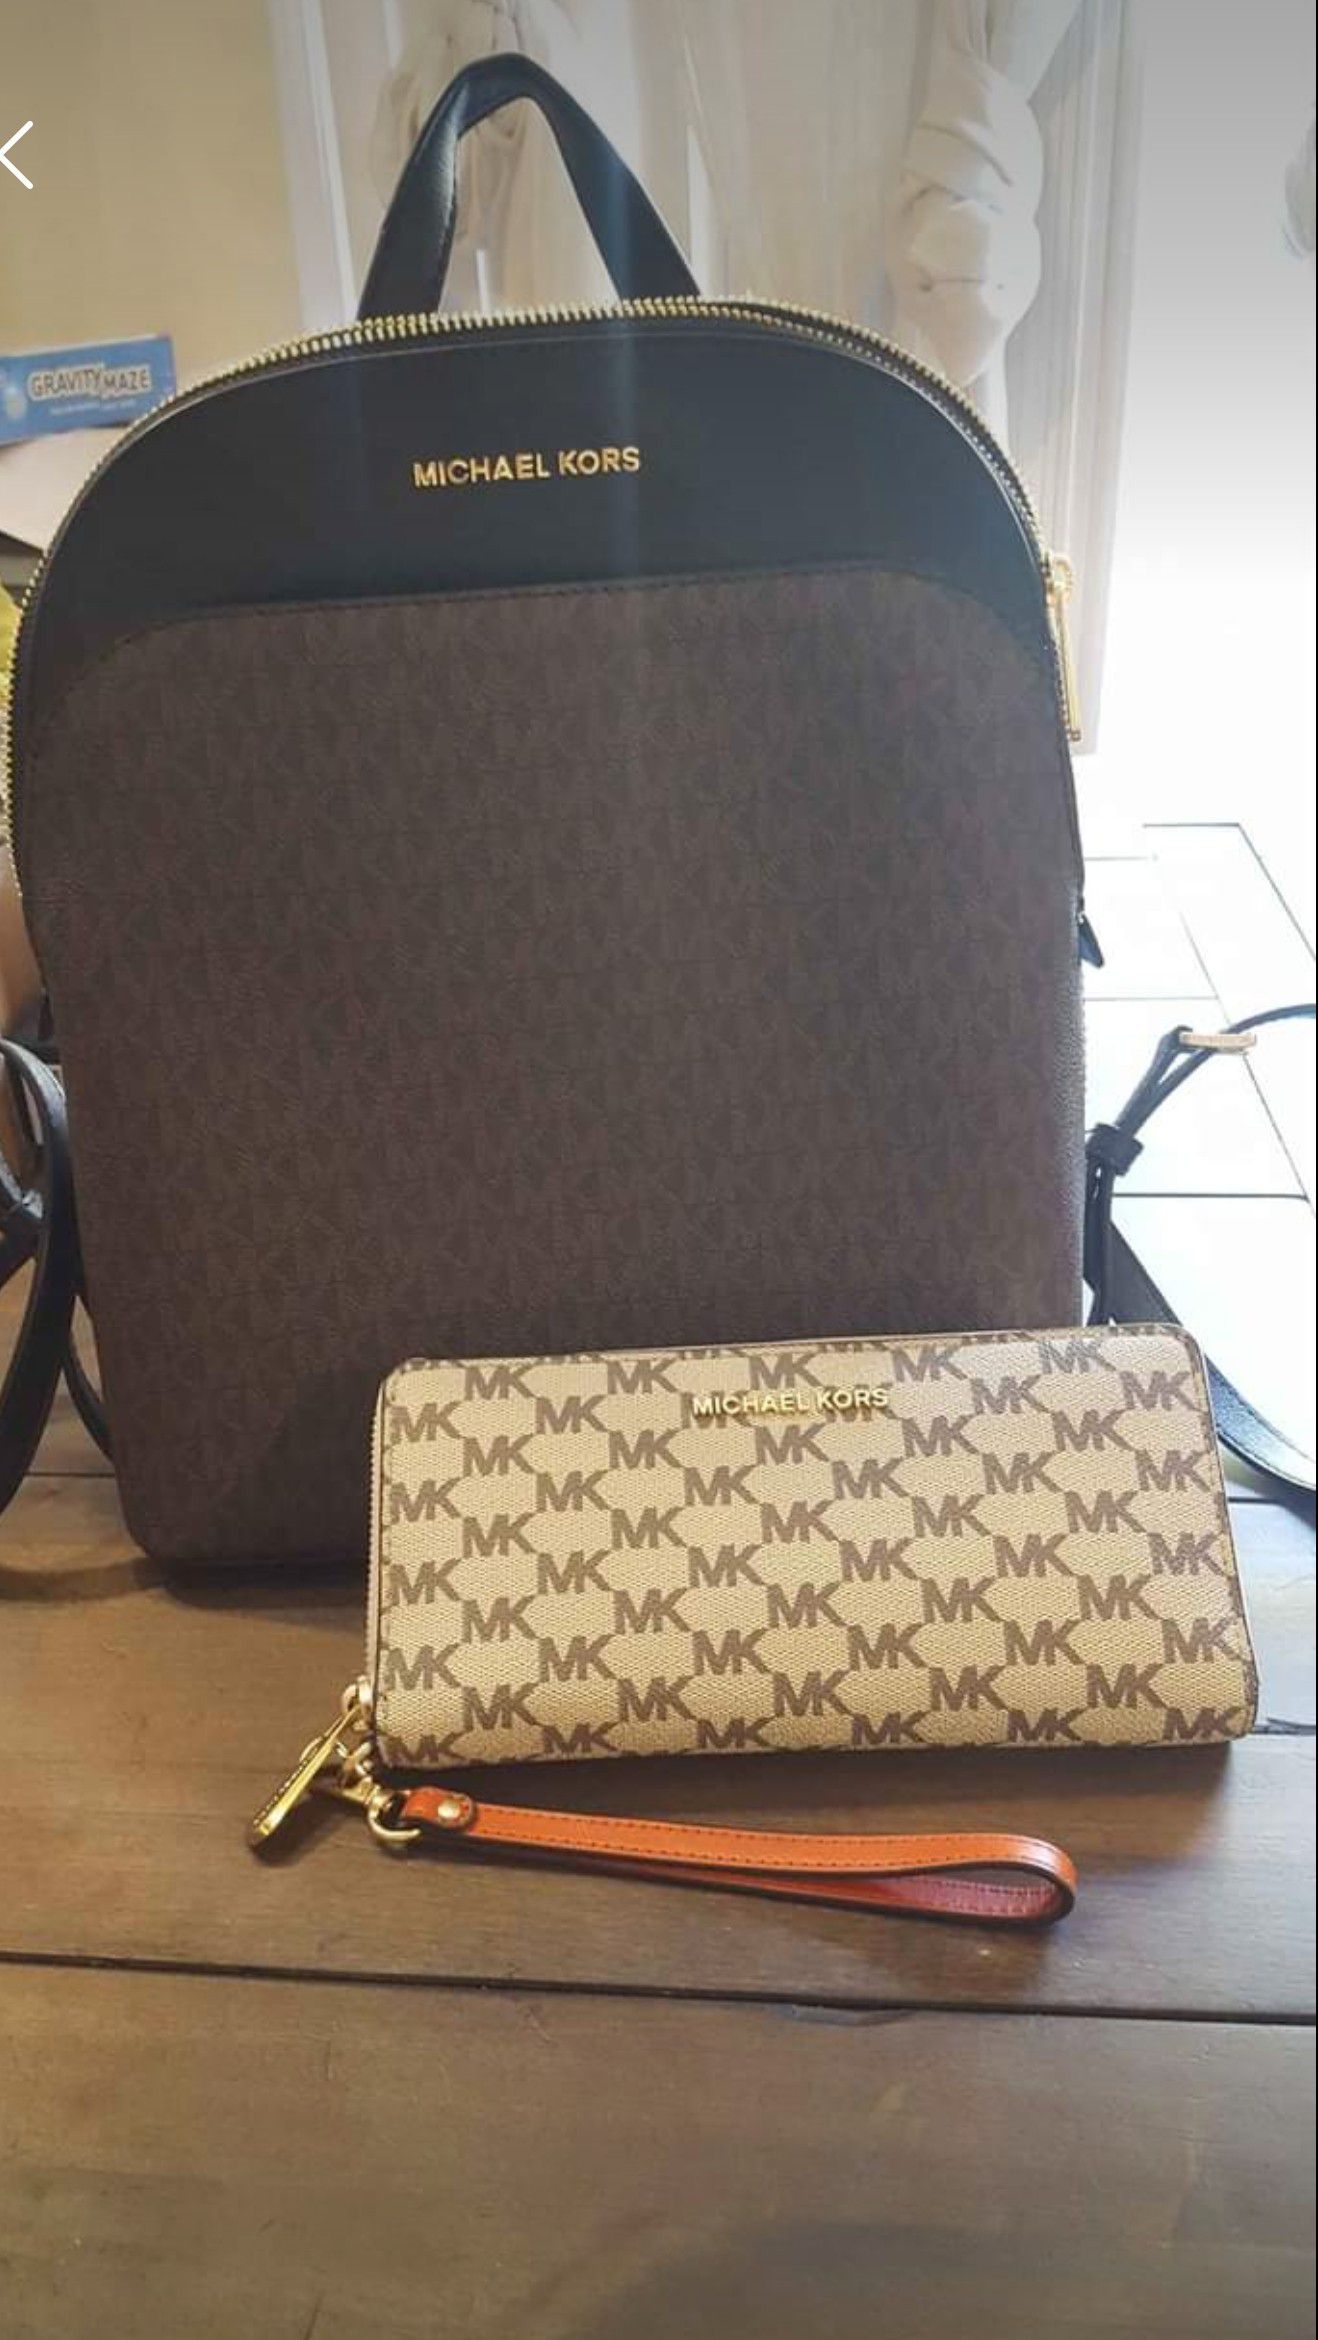 Michael kors backpack and wallet